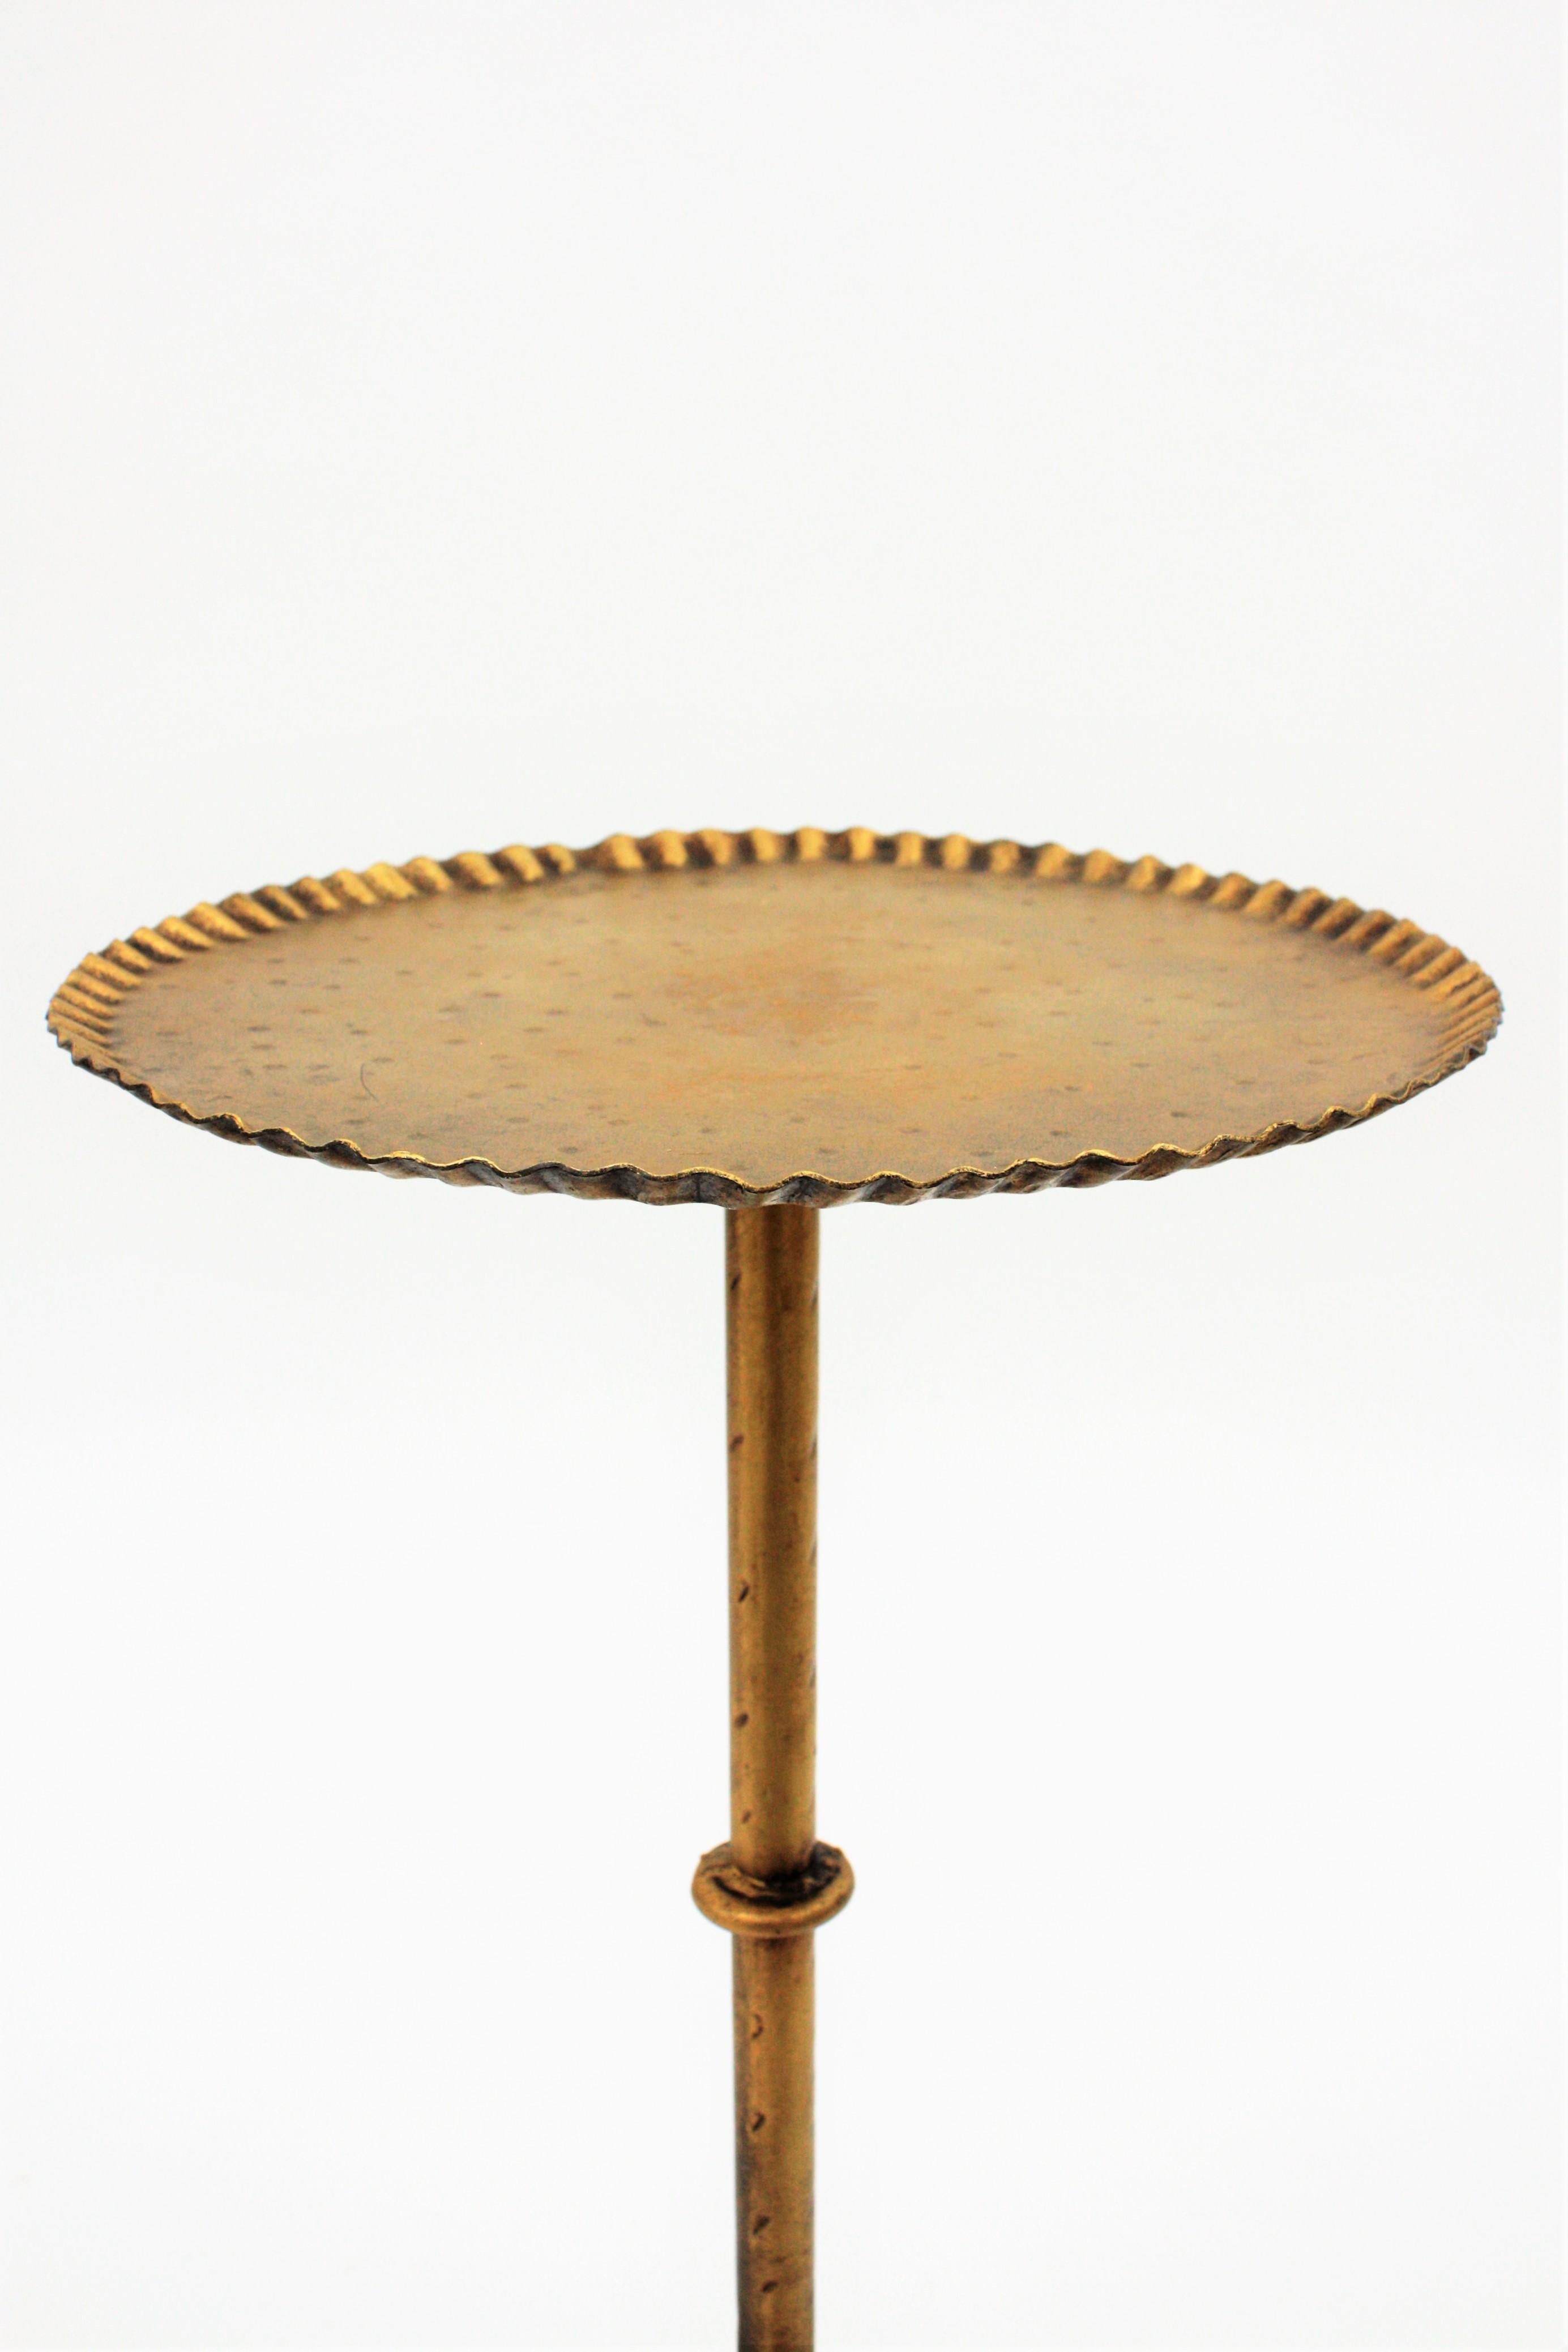 Spanish Gilt Iron Drinks Table Gueridon Side Table or Stand with Scalloped Rim 4